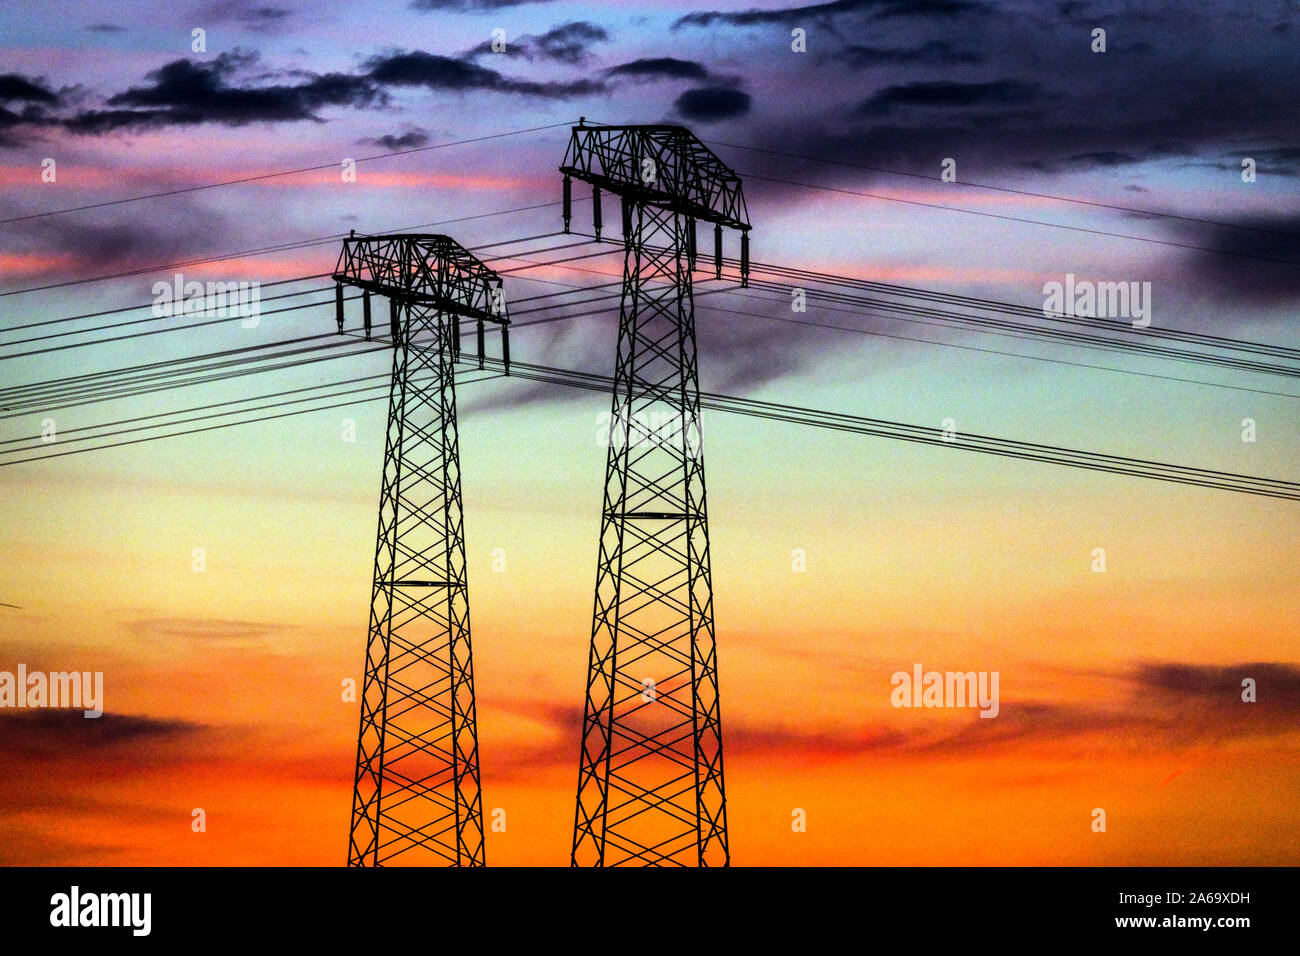 High voltage power lines sunset pylons transmission energy Germany Global warming sky Stock Photo